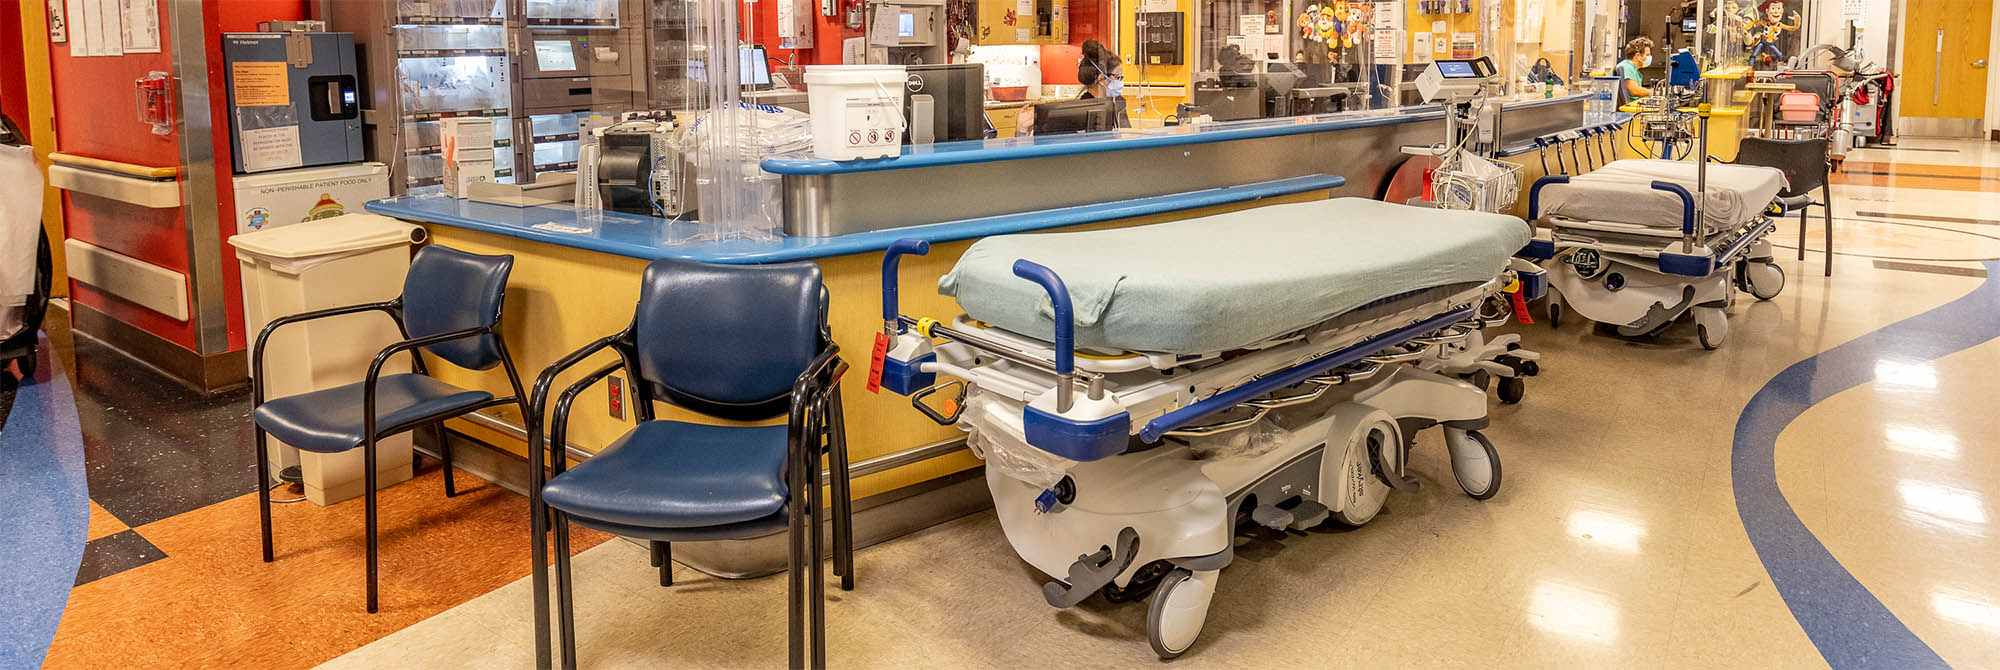 Reception desk of the UNM Emergency Room